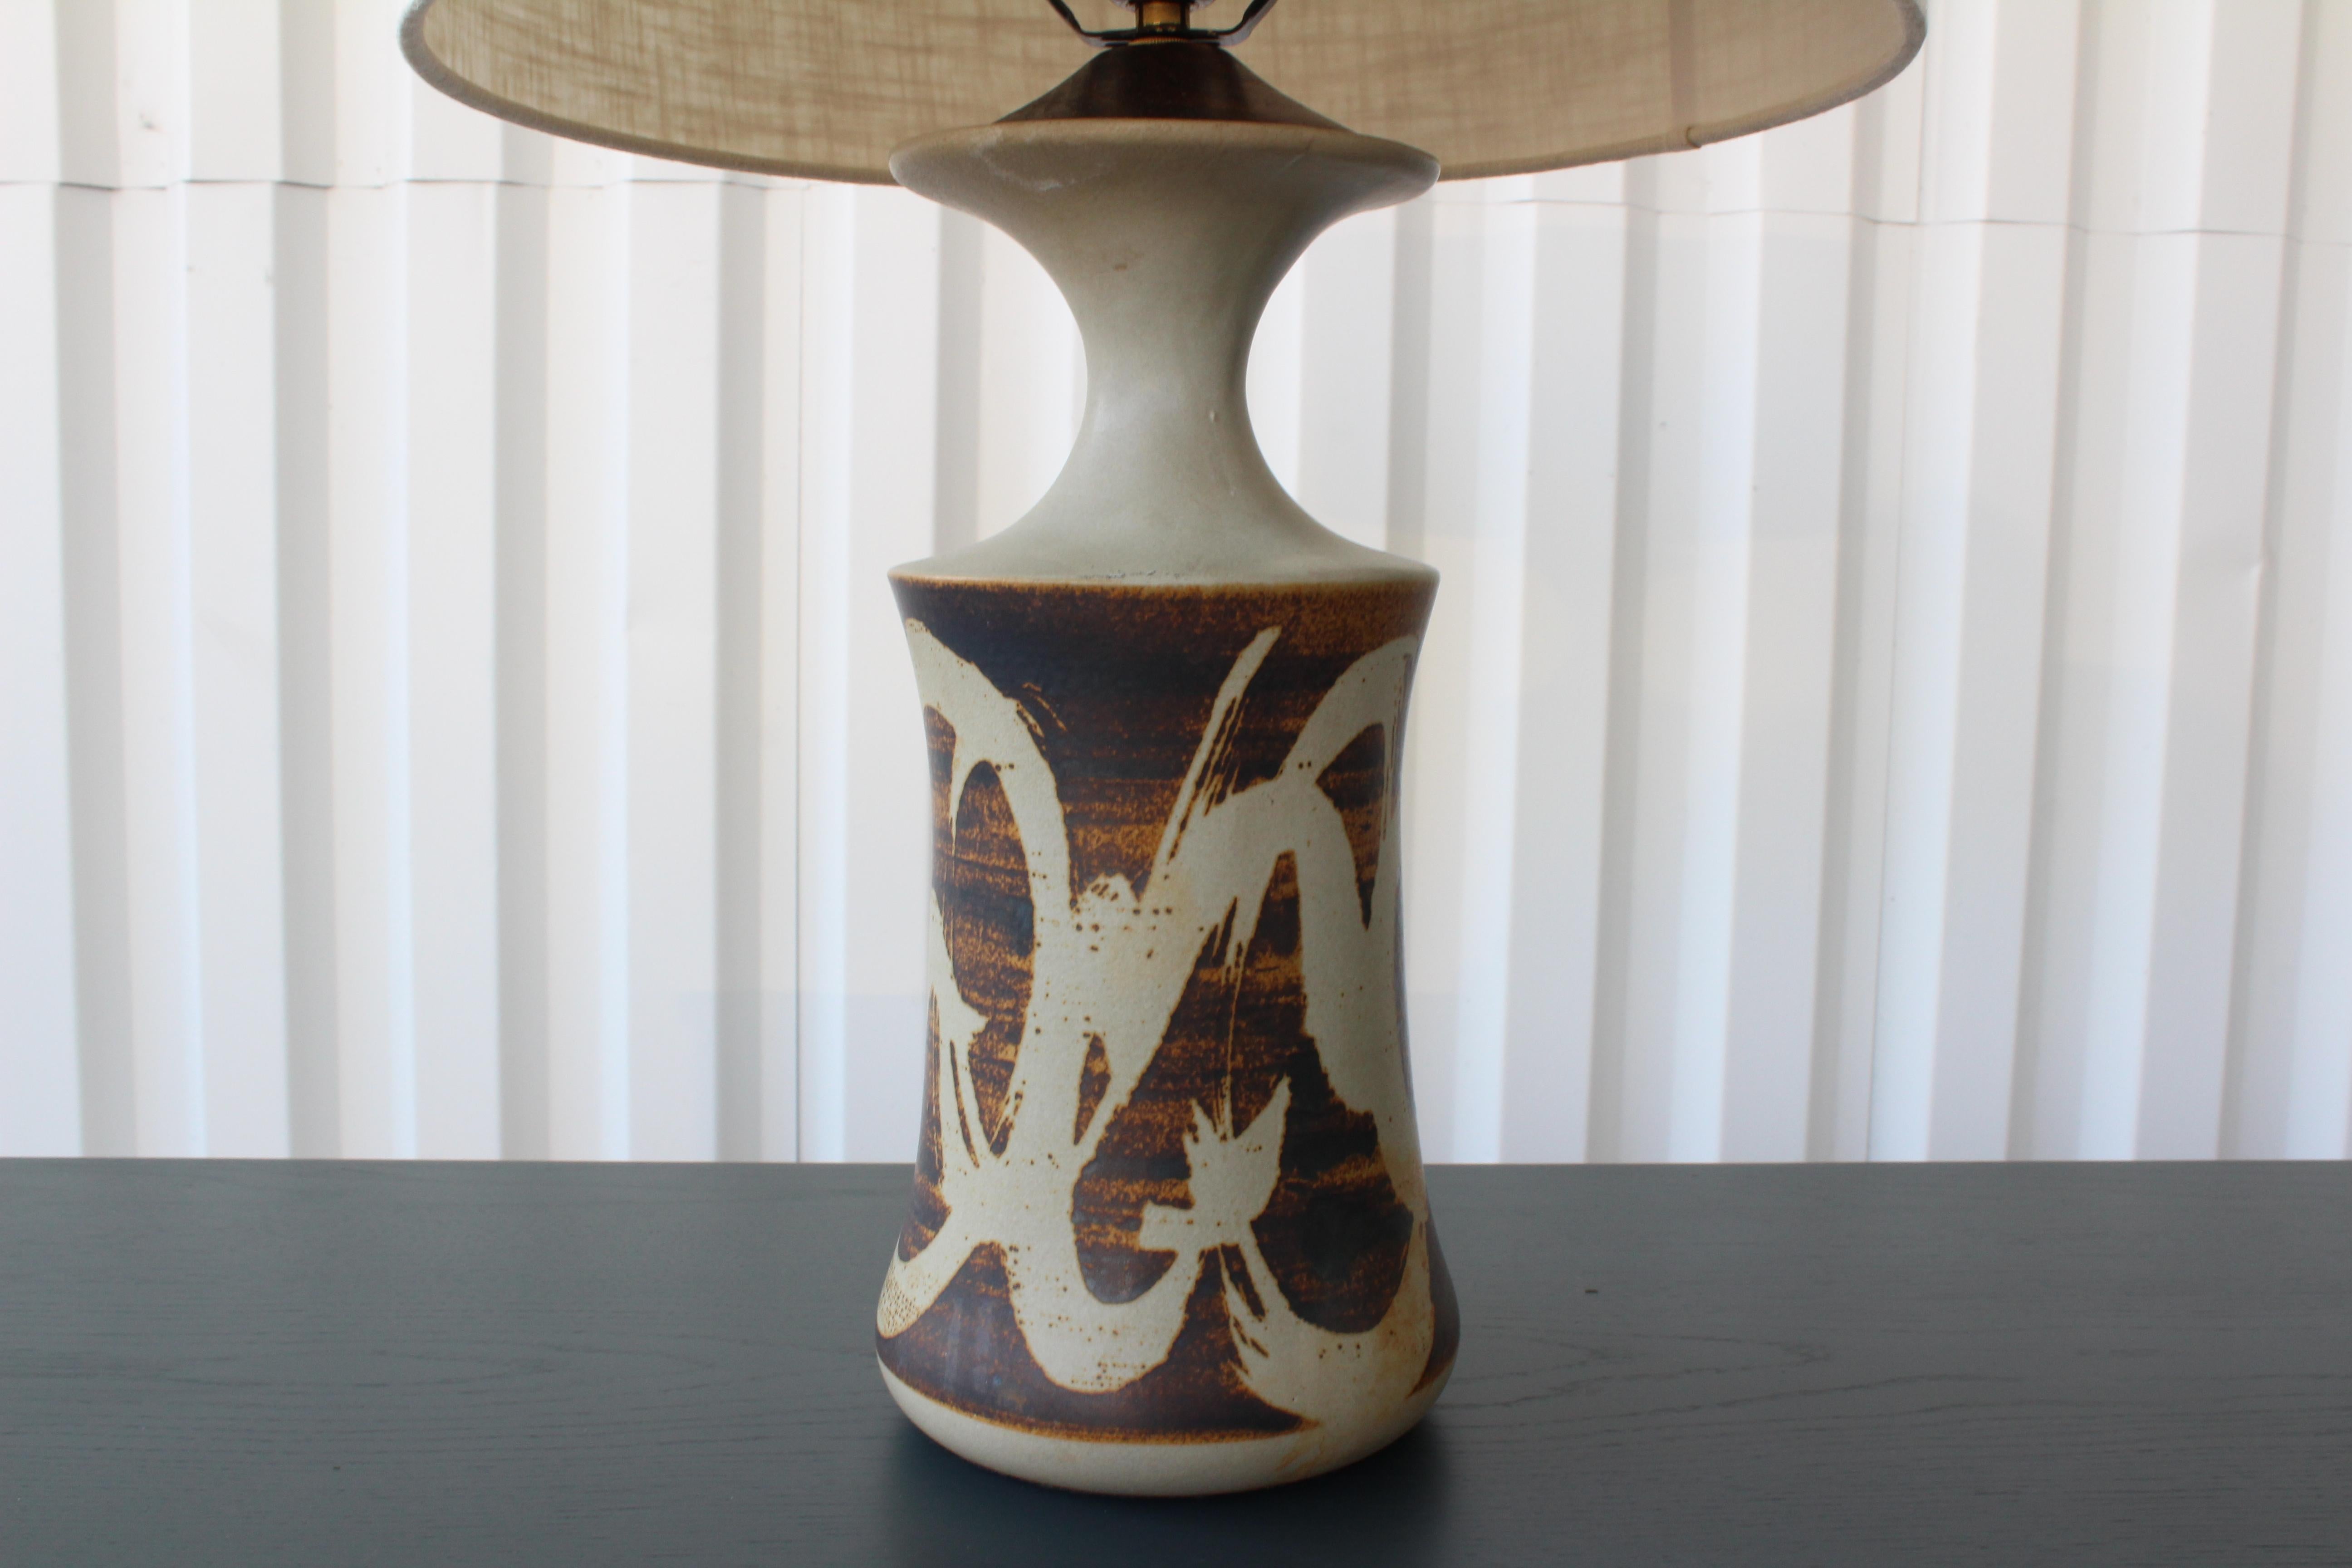 Ceramic table lamp by Pottery Craft, USA 1960s. This was a vase which we custom made into a table lamp. Newly wired and fitted with a custom shade.